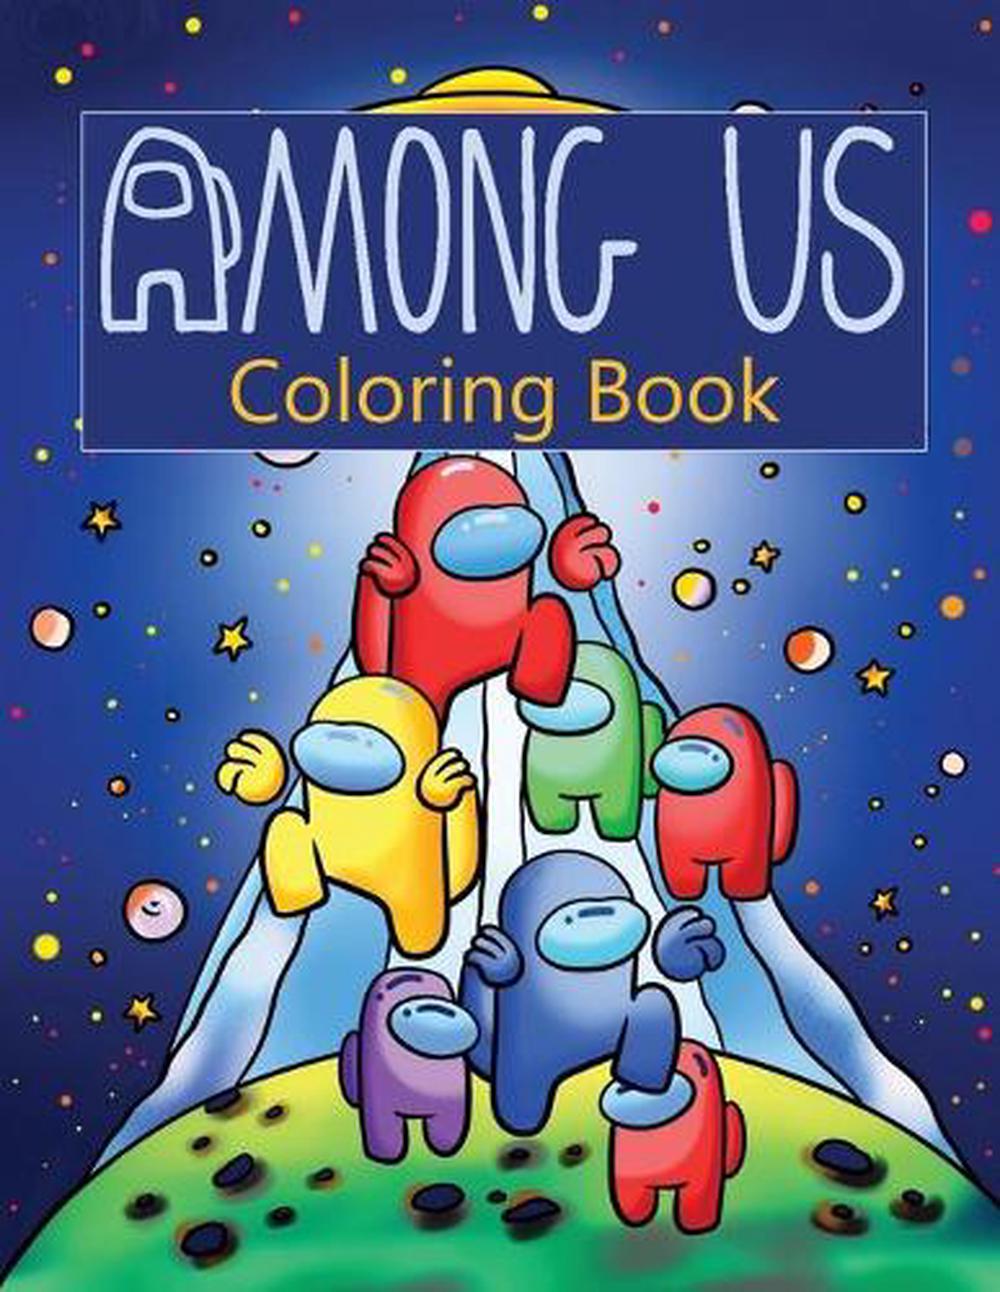 Among Us Coloring Book Coloring Book For Adult Featuring Impostors And Crewmate Ebay